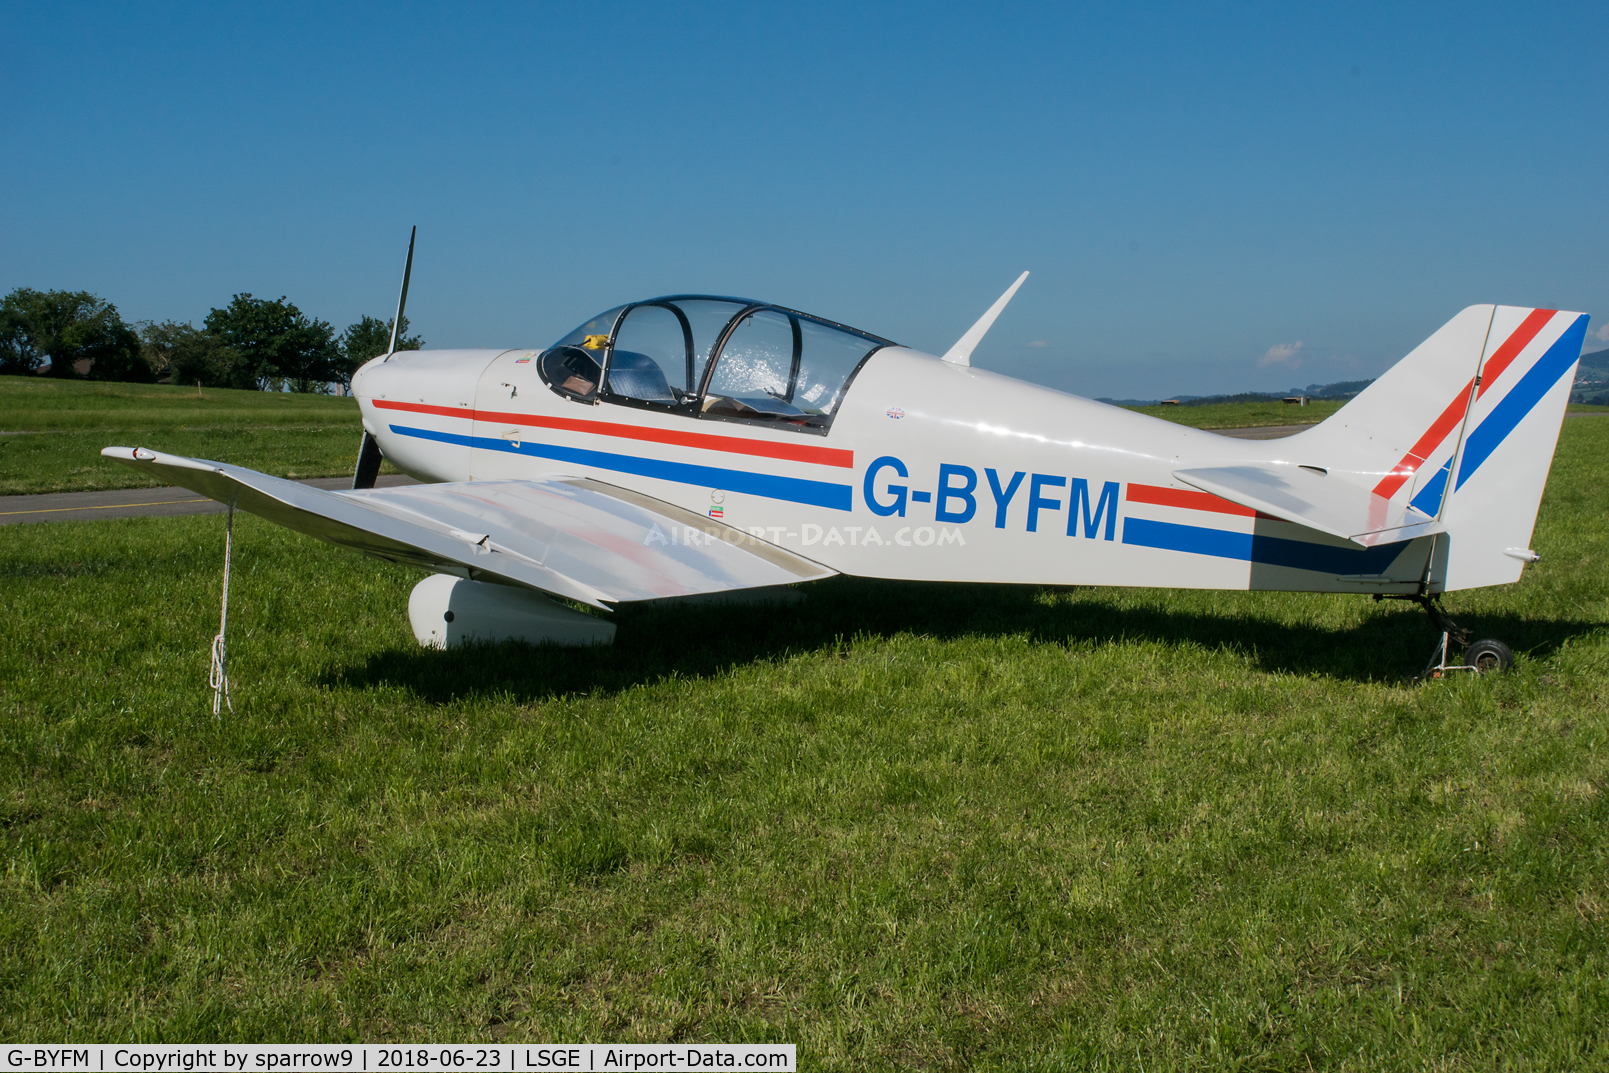 G-BYFM, 2000 Jodel DR-1050 M1 Excellence Replica C/N PFA 304-13237, Met his colleague here.